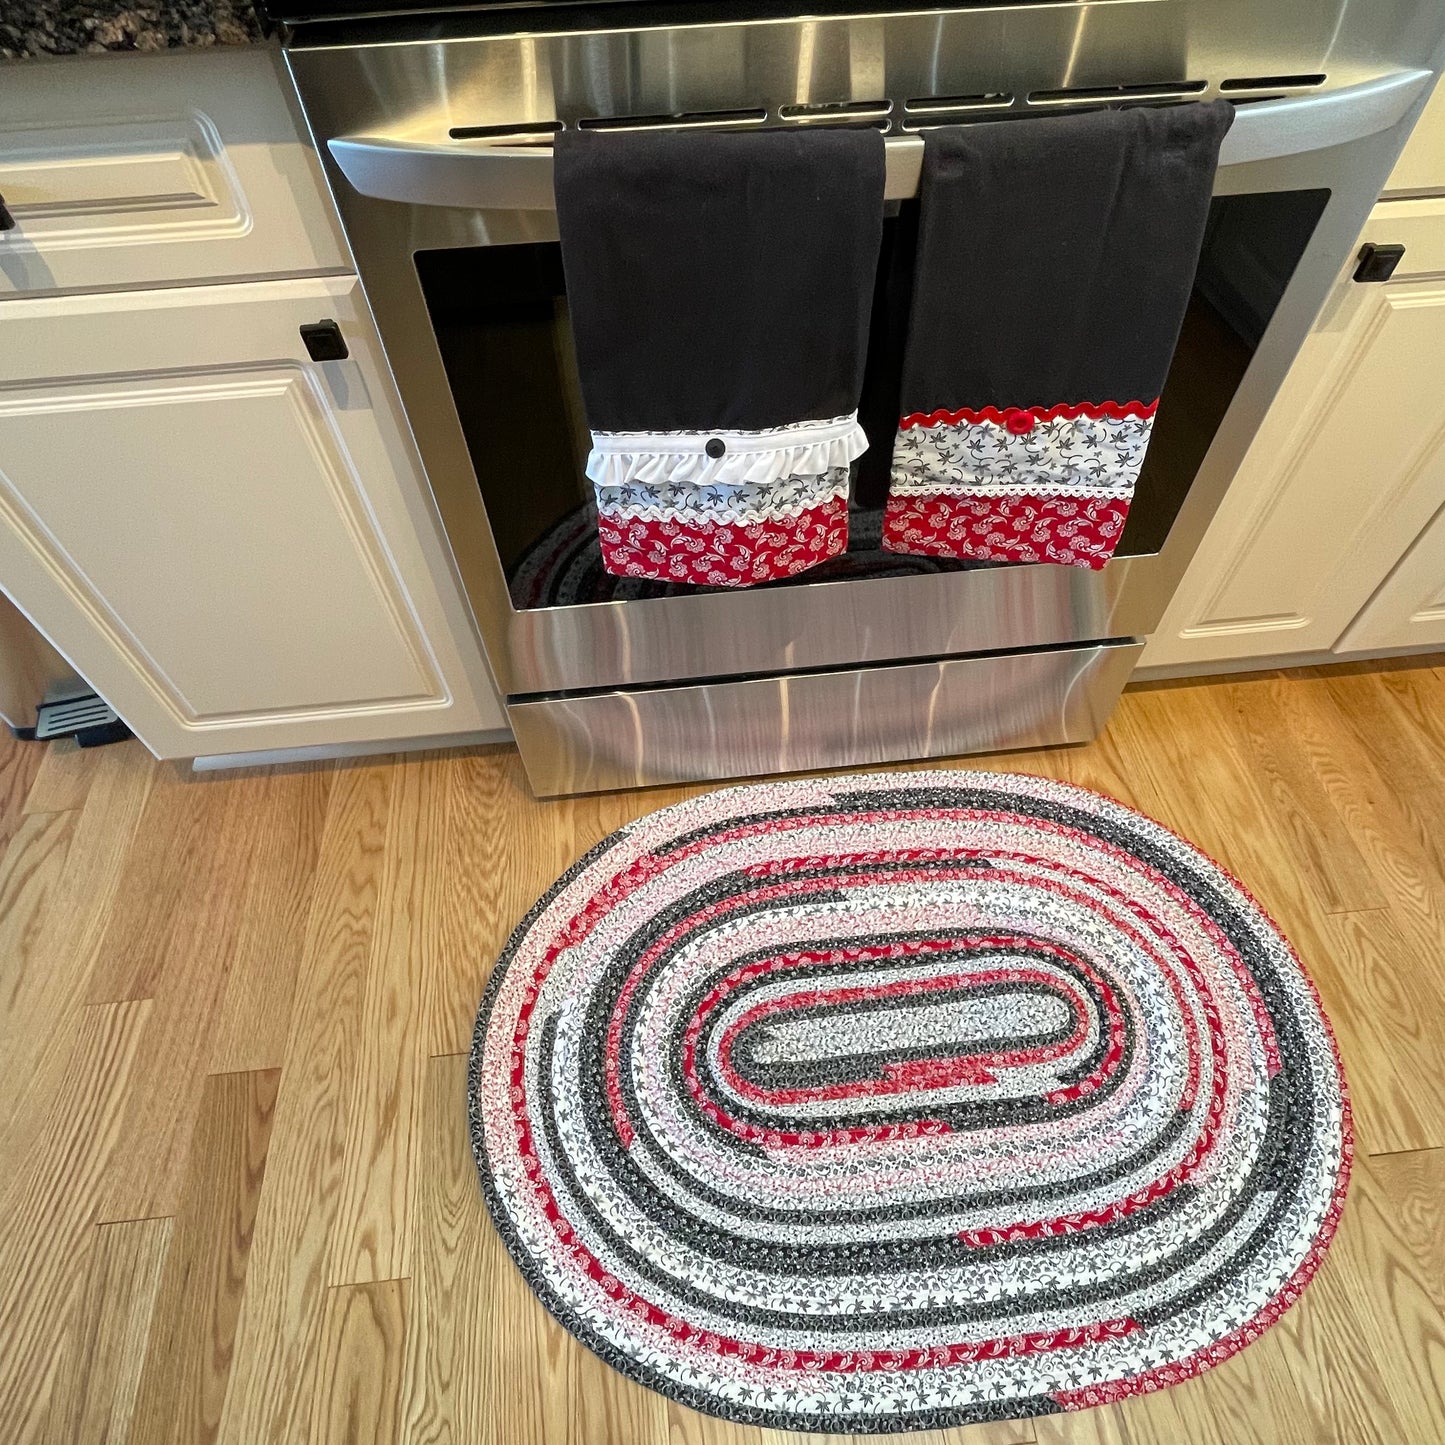 Vintage Red, White & Black Washable Cotton Farmhouse Kitchen JellyRoll Rug - Handmade in Canada